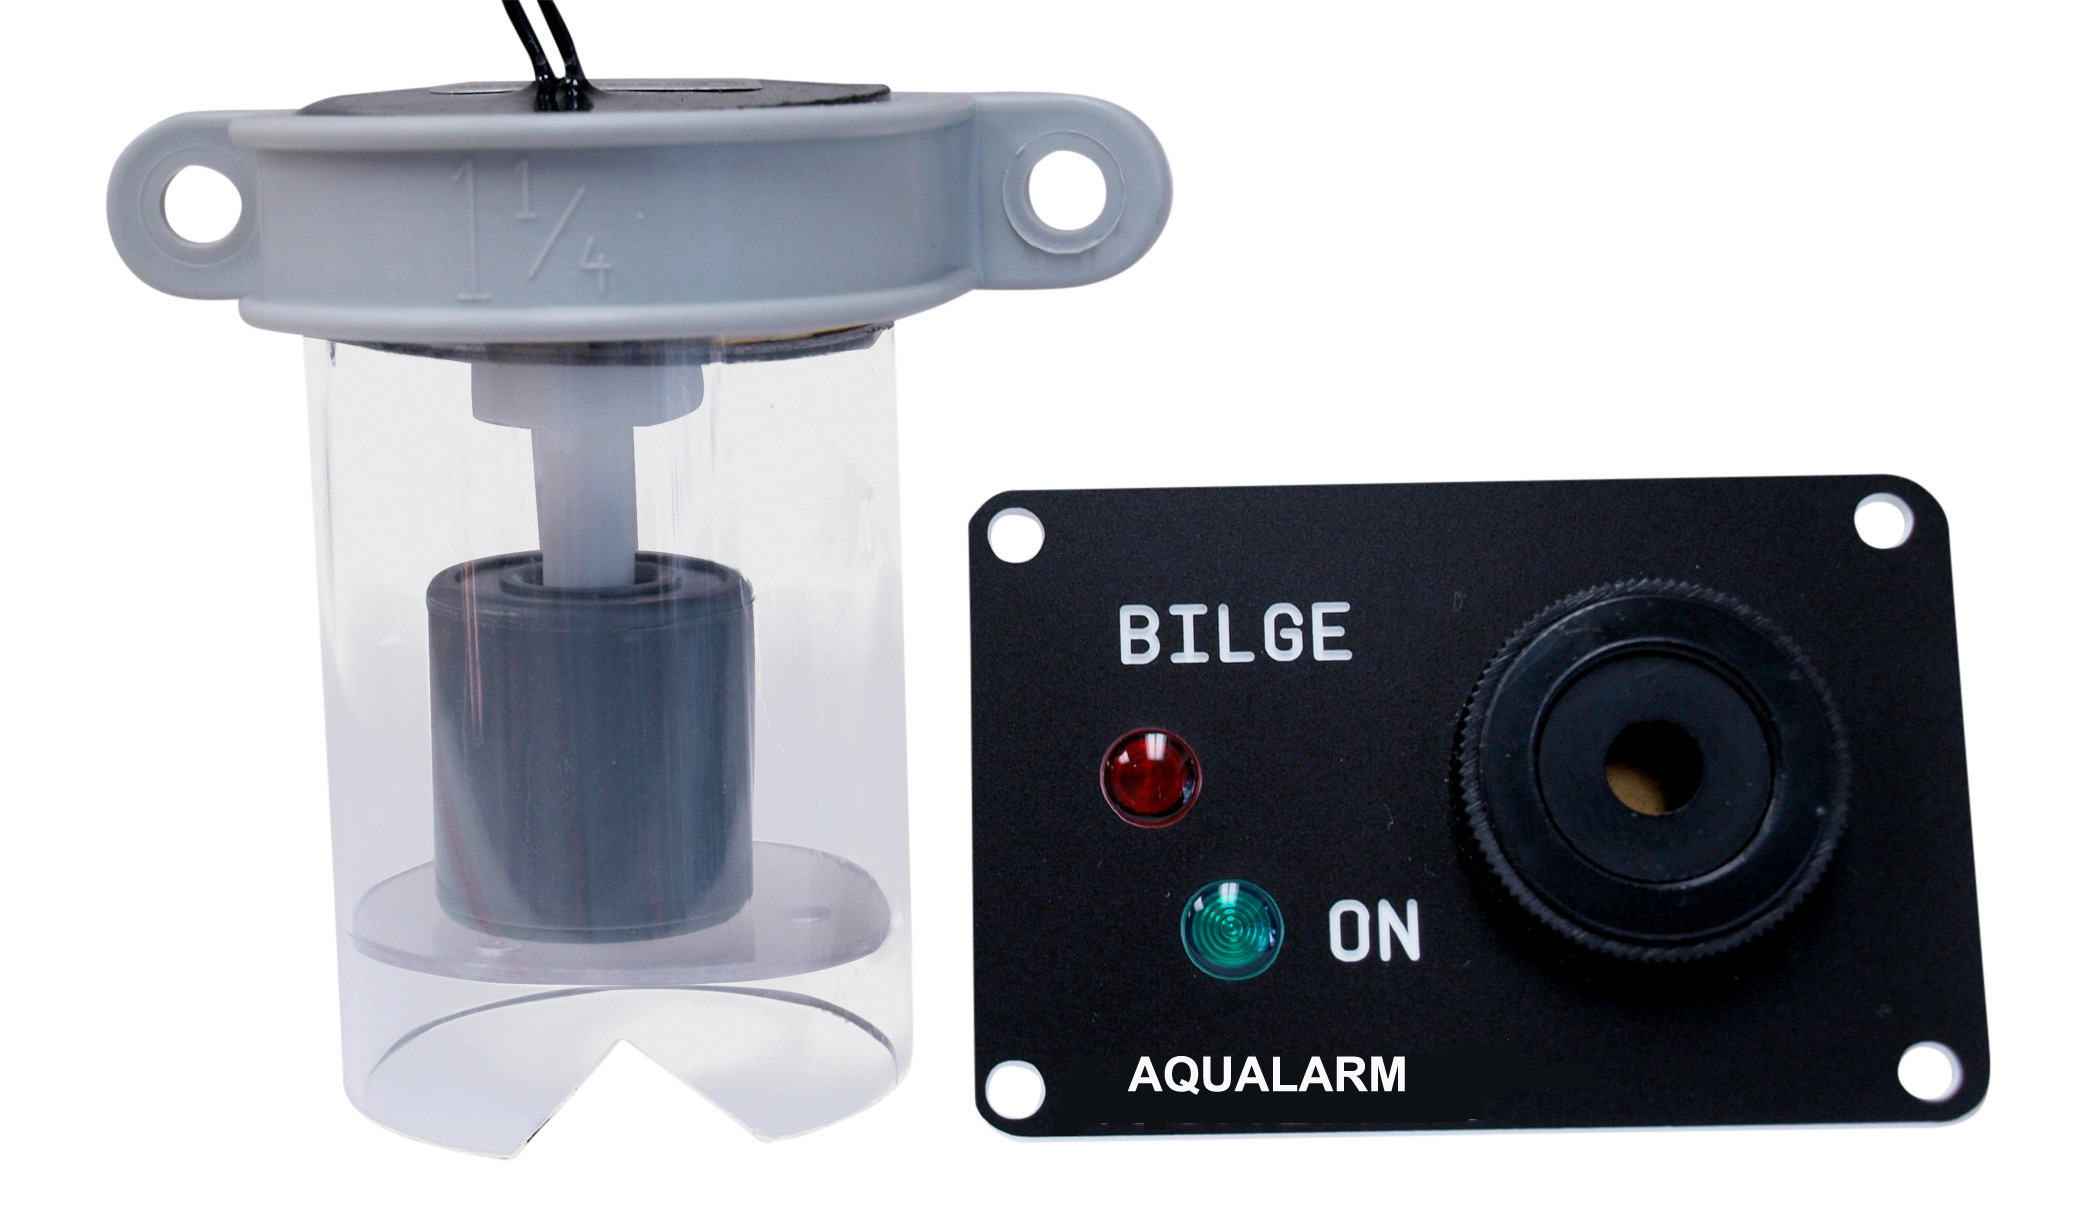 20240 Bilge High Water Warning with Detector